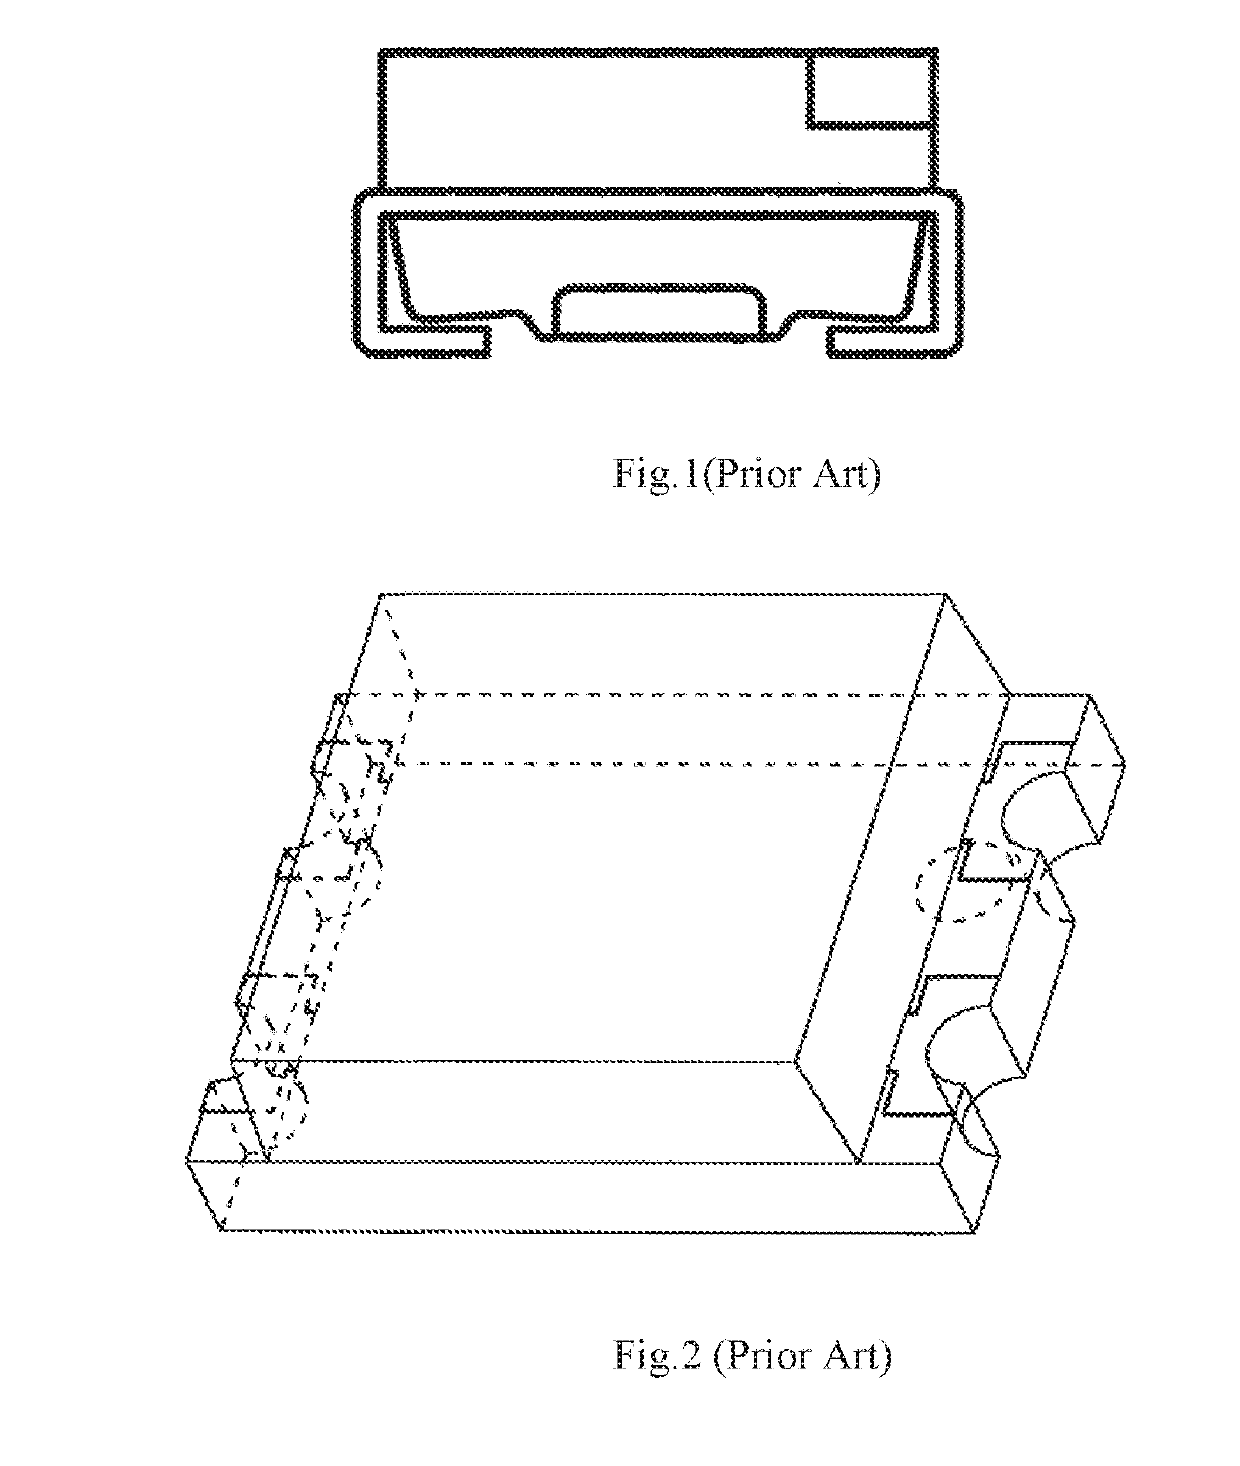 Surface-Mounted RGB-LED Packaging Module and Preparing Method Thereof